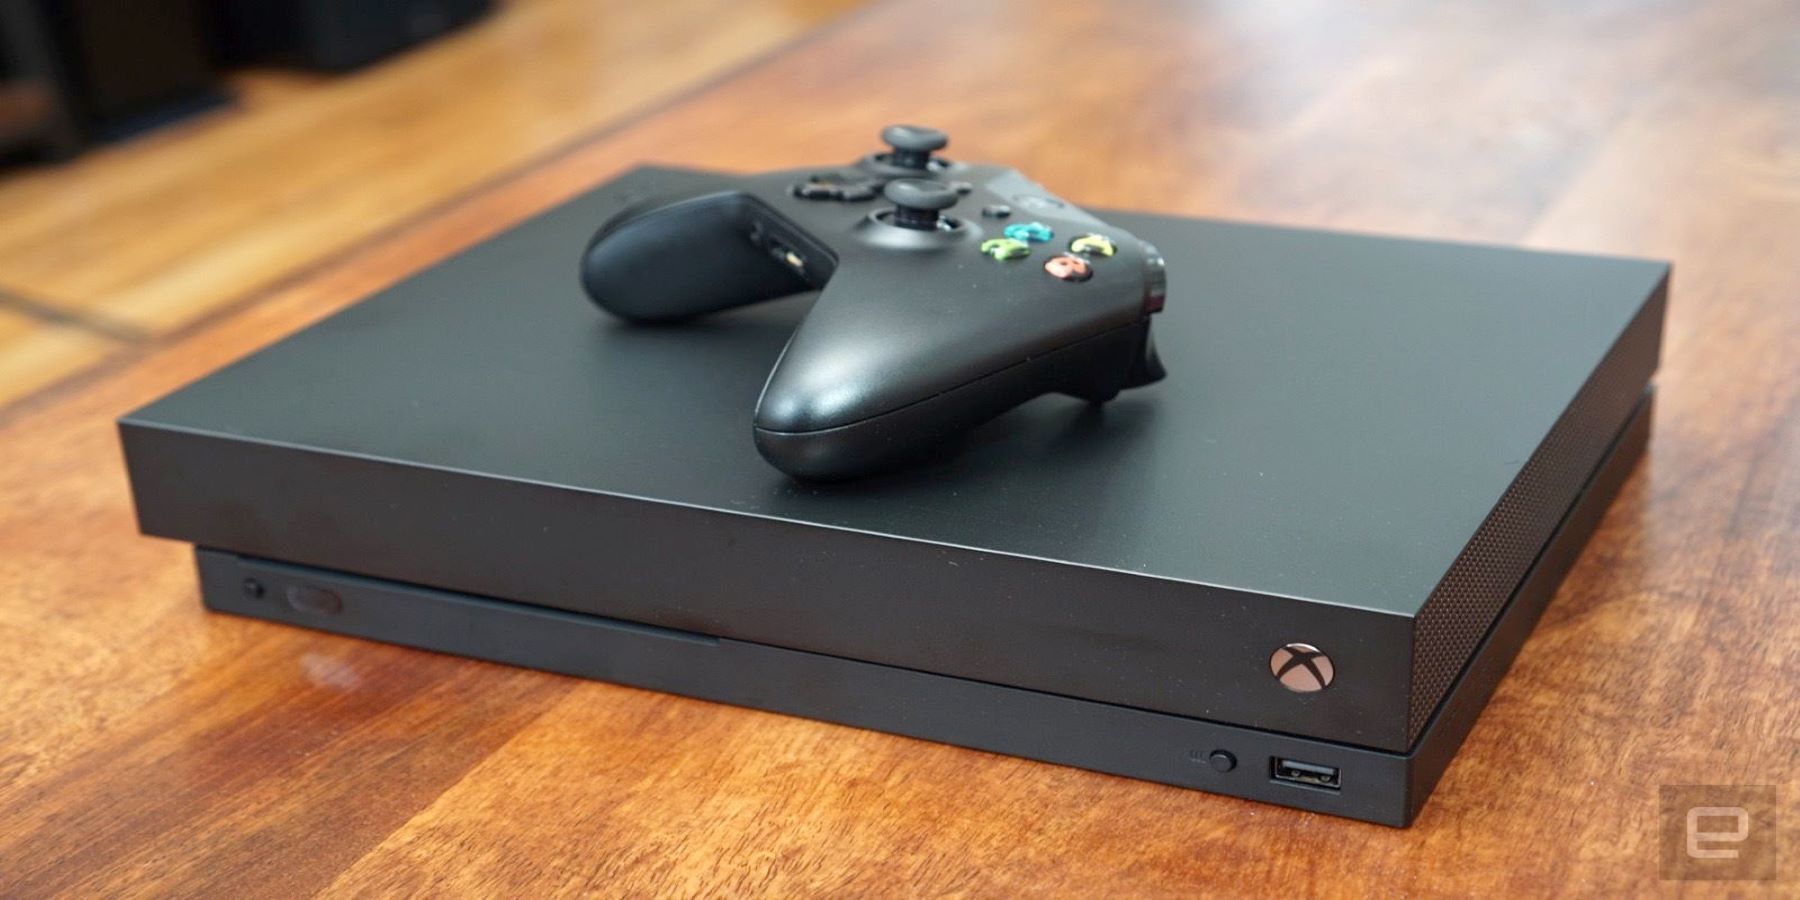 How to Reset Xbox One to Factory Default settings